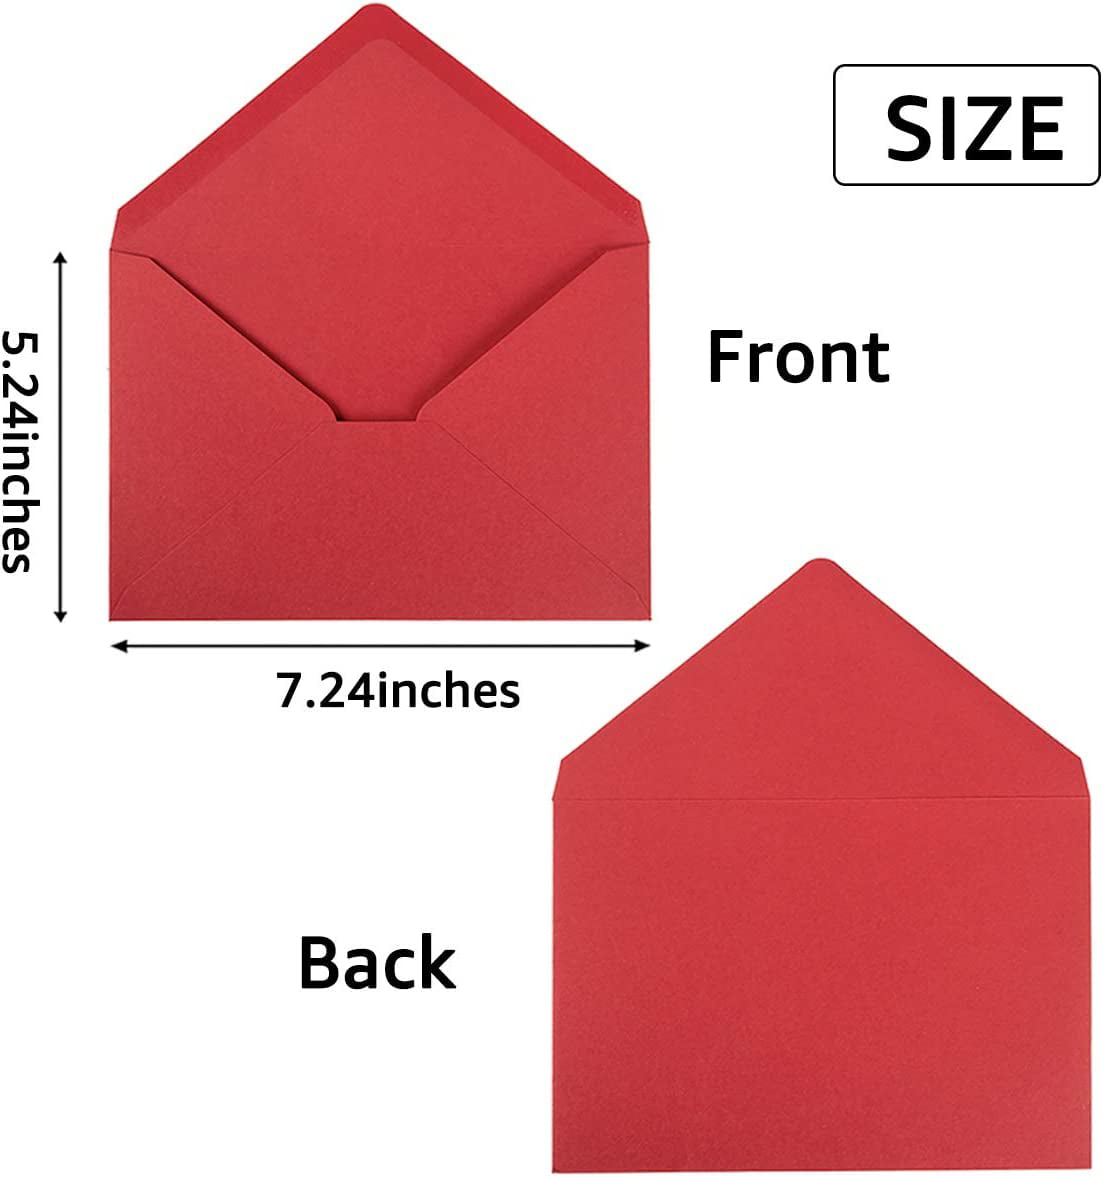 A7 Printable Red Envelopes 5X7 50 Pack - Quick Self Seal,for 5x7 Cards|  Perfect for Weddings, Invitations, Photos, Graduation, Baby Shower| 5.25 x